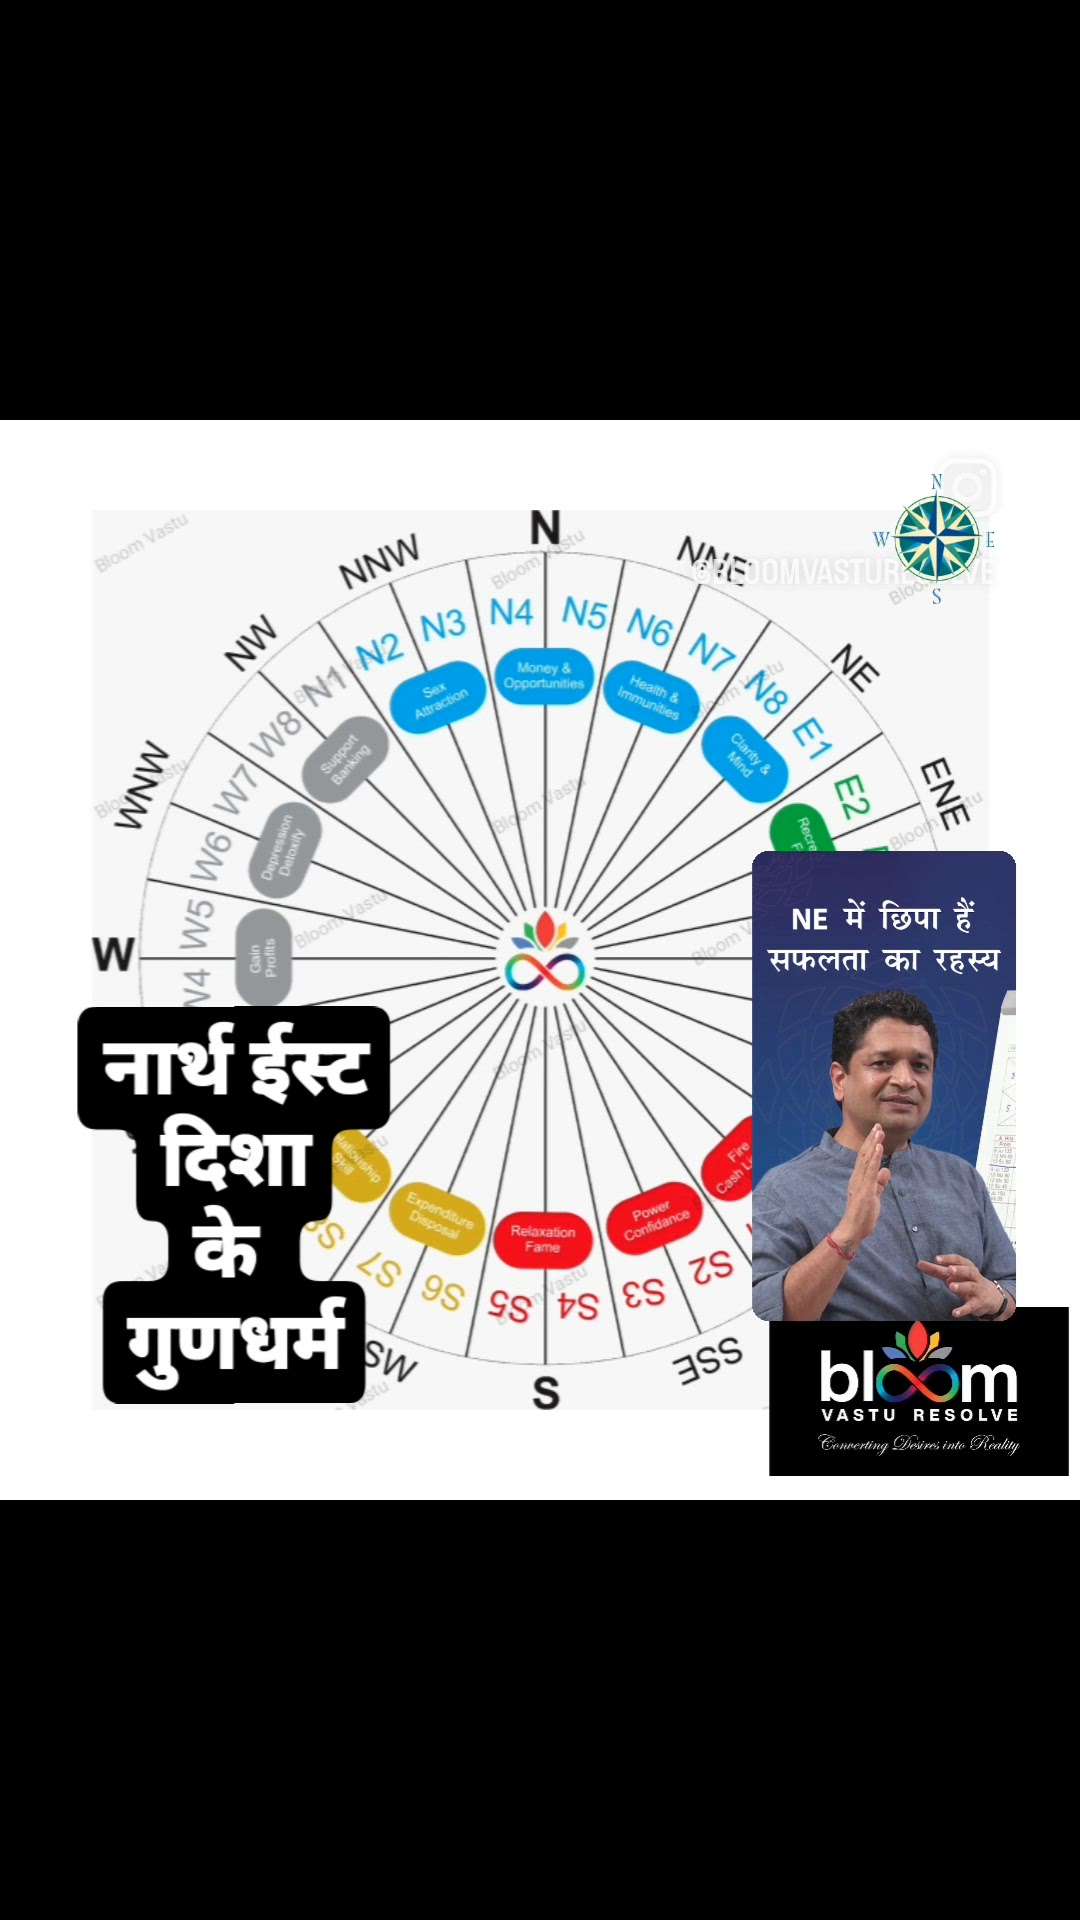 Your queries and comments are always welcome.
For more Vastu please follow @bloomvasturesolve
on YouTube, Instagram & Facebook
.
.
For personal consultation, feel free to contact certified MahaVastu Expert through
M - 9826592271
Or
bloomvasturesolve@gmail.com
#vastu #वास्तु #mahavastu #mahavastuexpert #bloomvasturesolve  #vastureels #vastulogy #vastuexpert  #vasturemedies  #vastuforhome #vastuforpeace #vastudosh #numerology #vastuforgrowth #numerology #northeastzone #nezone #ईशानकोण #northeastdirection